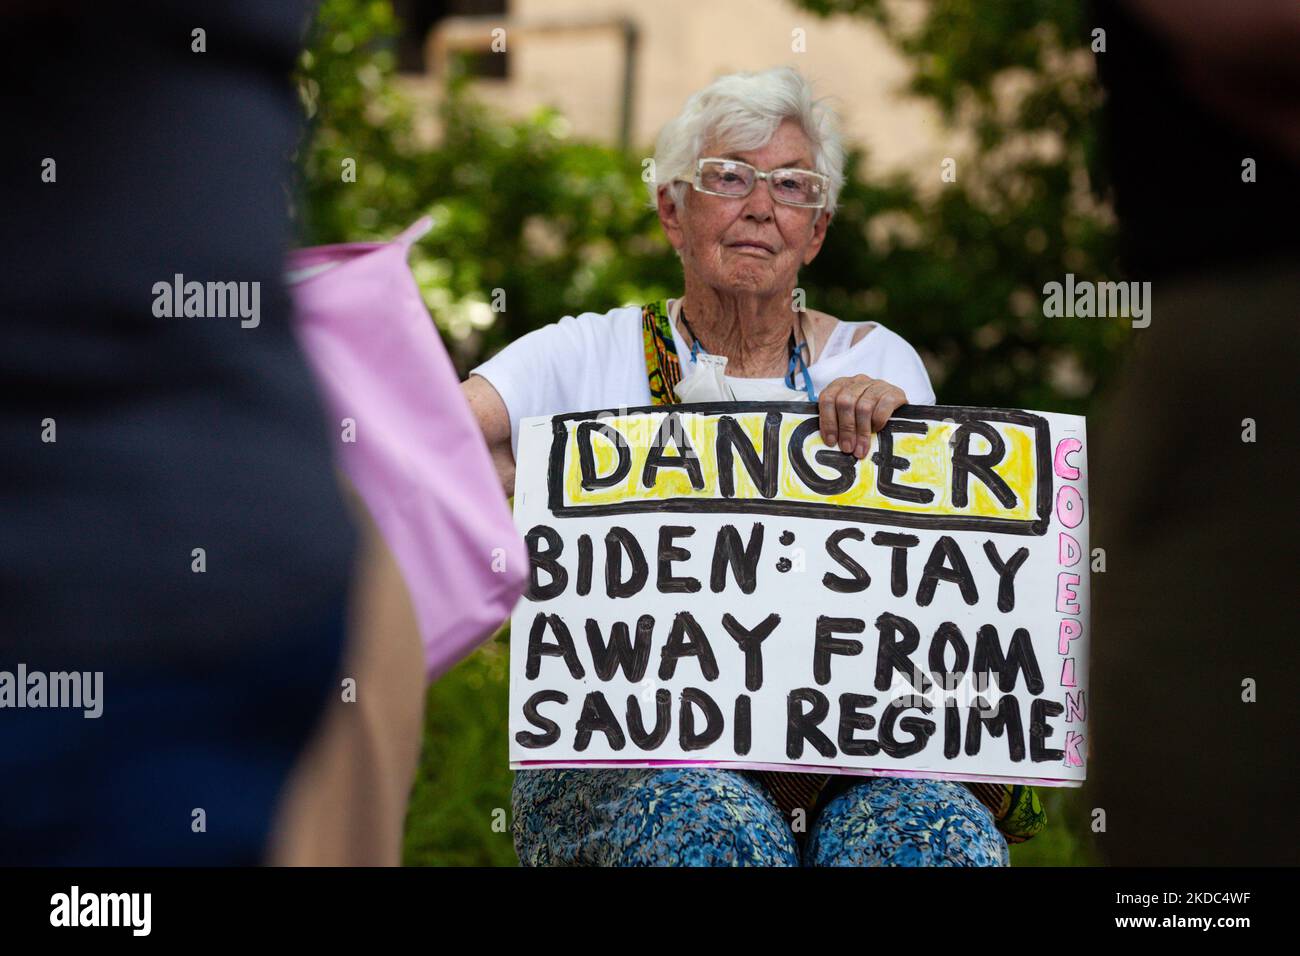 A protester with CODEPINK attends the designation of Jamal Khashoggi Way in front of the Saudi Arabian embassy in Washington, DC. Khashoggi was a Saudi citizen and dissident journalist and was a regular contributor at the Washington Post. He was murdered and dismembered at the Saudi consulate in Istanbul, Turkey, on October 2, 2018. It is widely believed that his murder was ordered by Saudi Crown Prince Mohammed bin Salman. (Photo by Allison Bailey/NurPhoto) Stock Photo